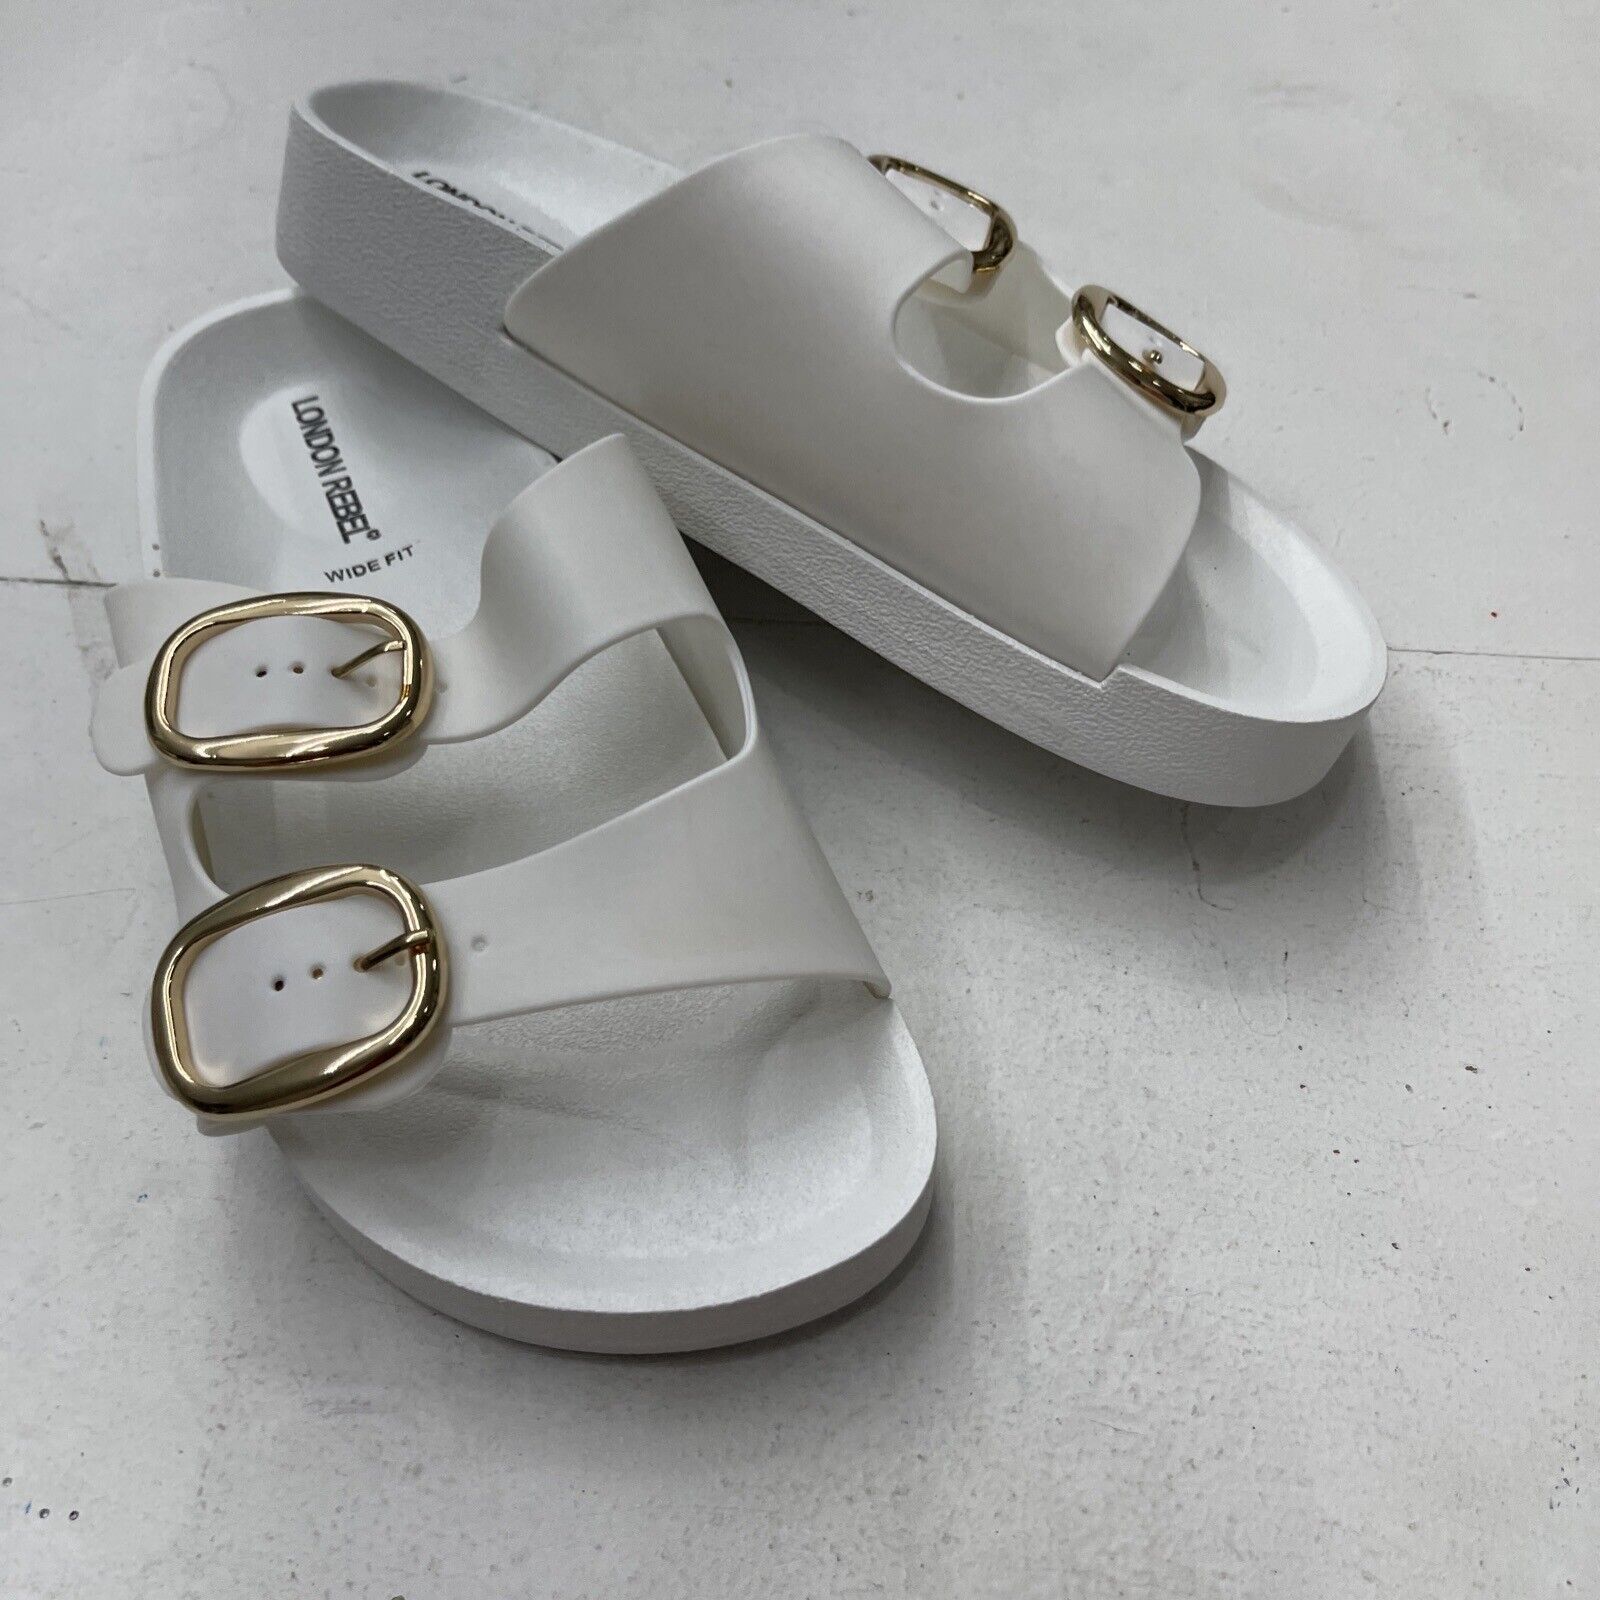 ASOS London Rebel White Double Buckle Footbed Sandals Women's Size 8 N -  beyond exchange